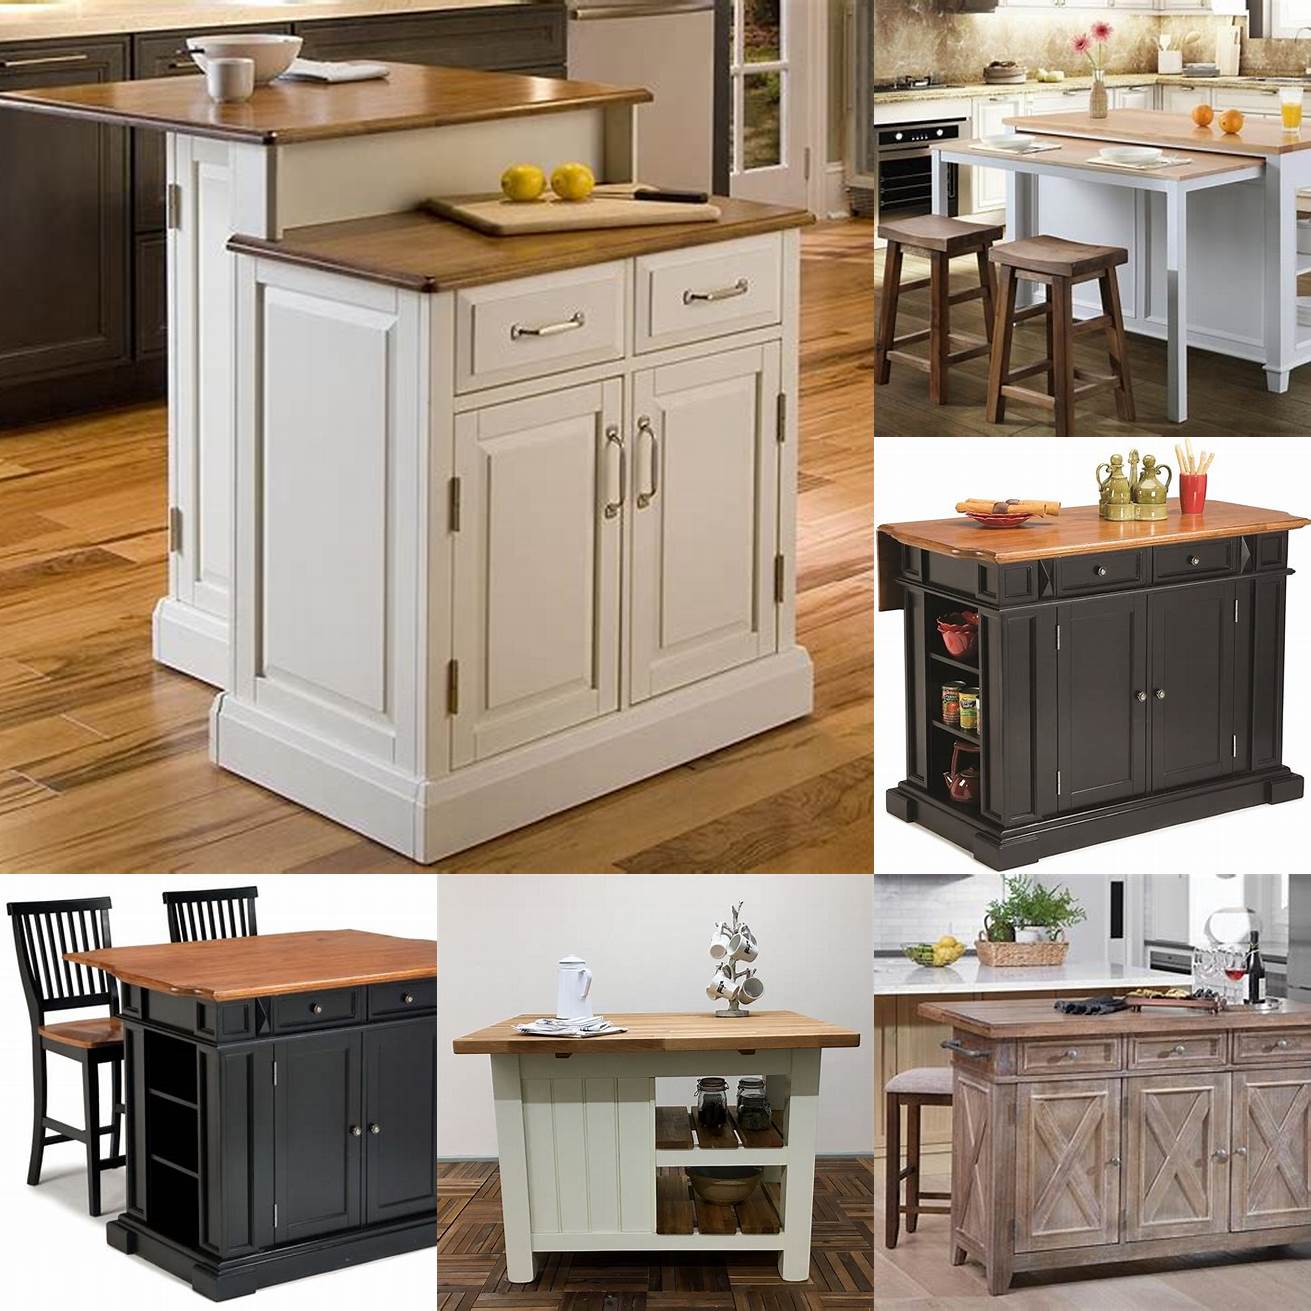 Freestanding kitchen island with storage and seating